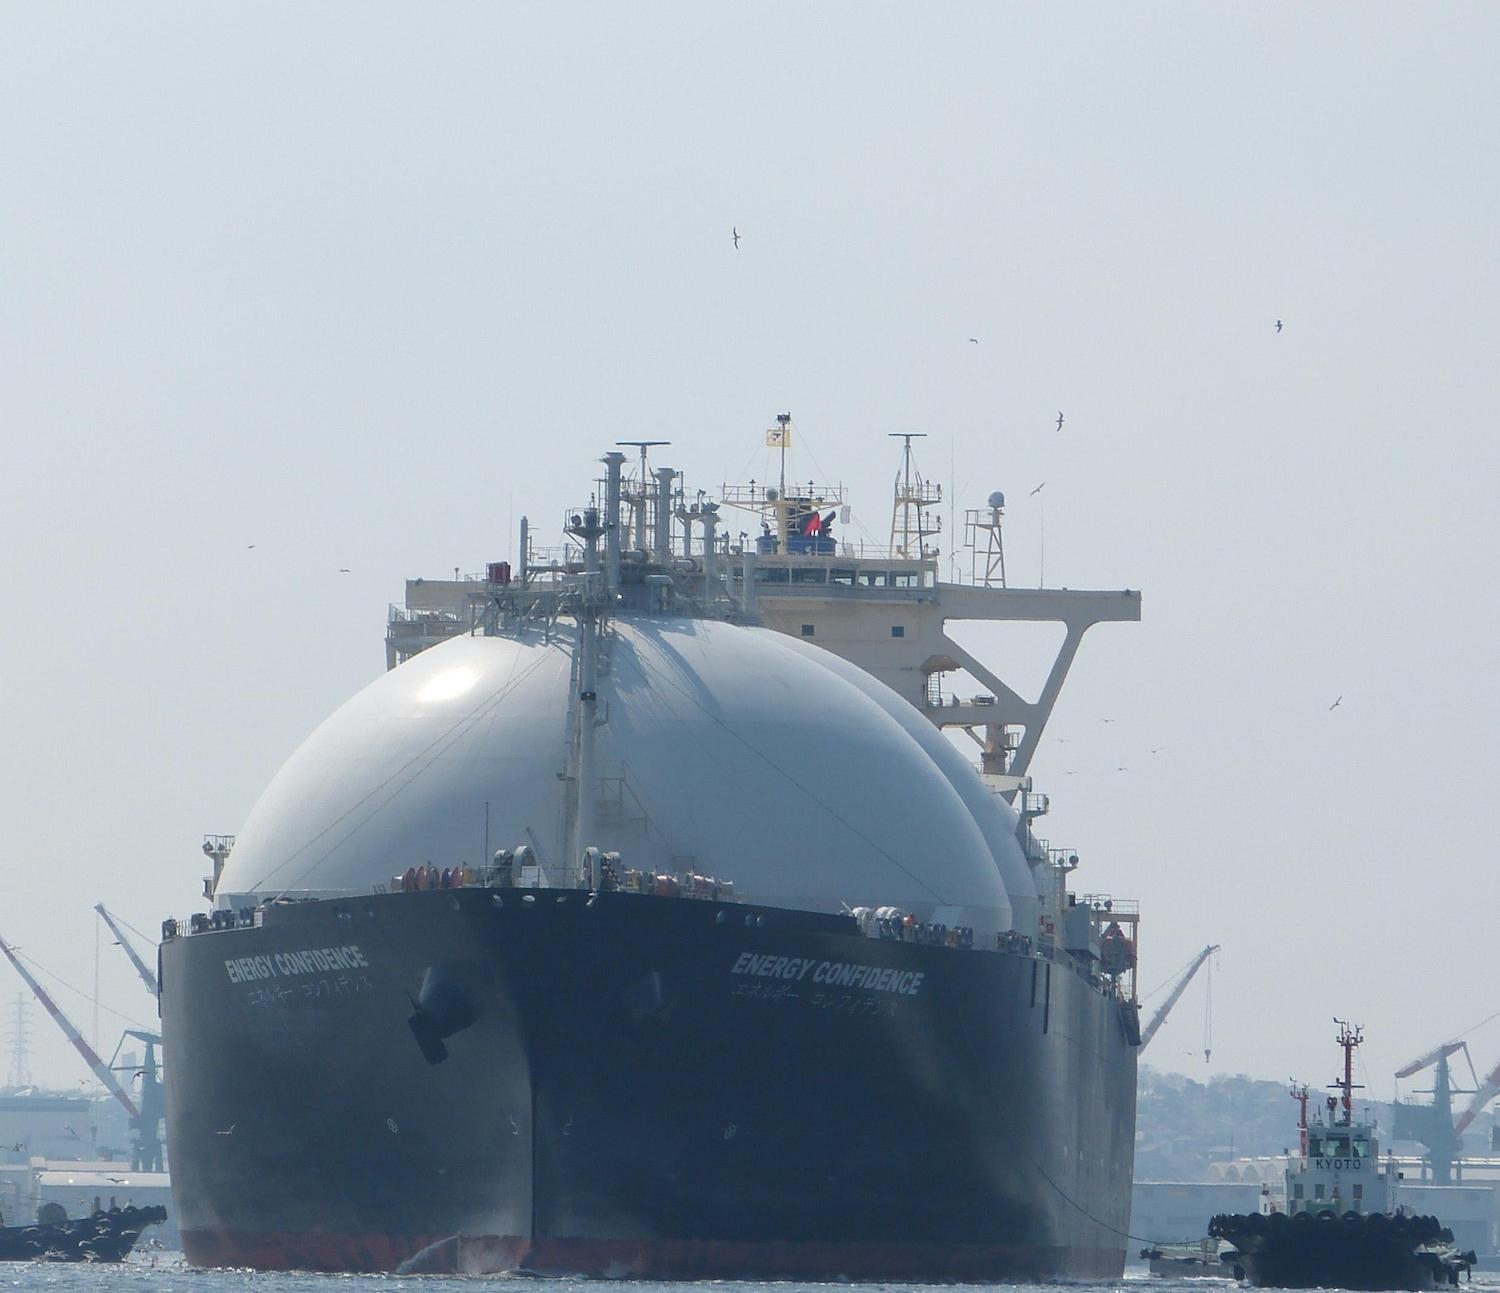 NYK LNG carrier Energy Confidence